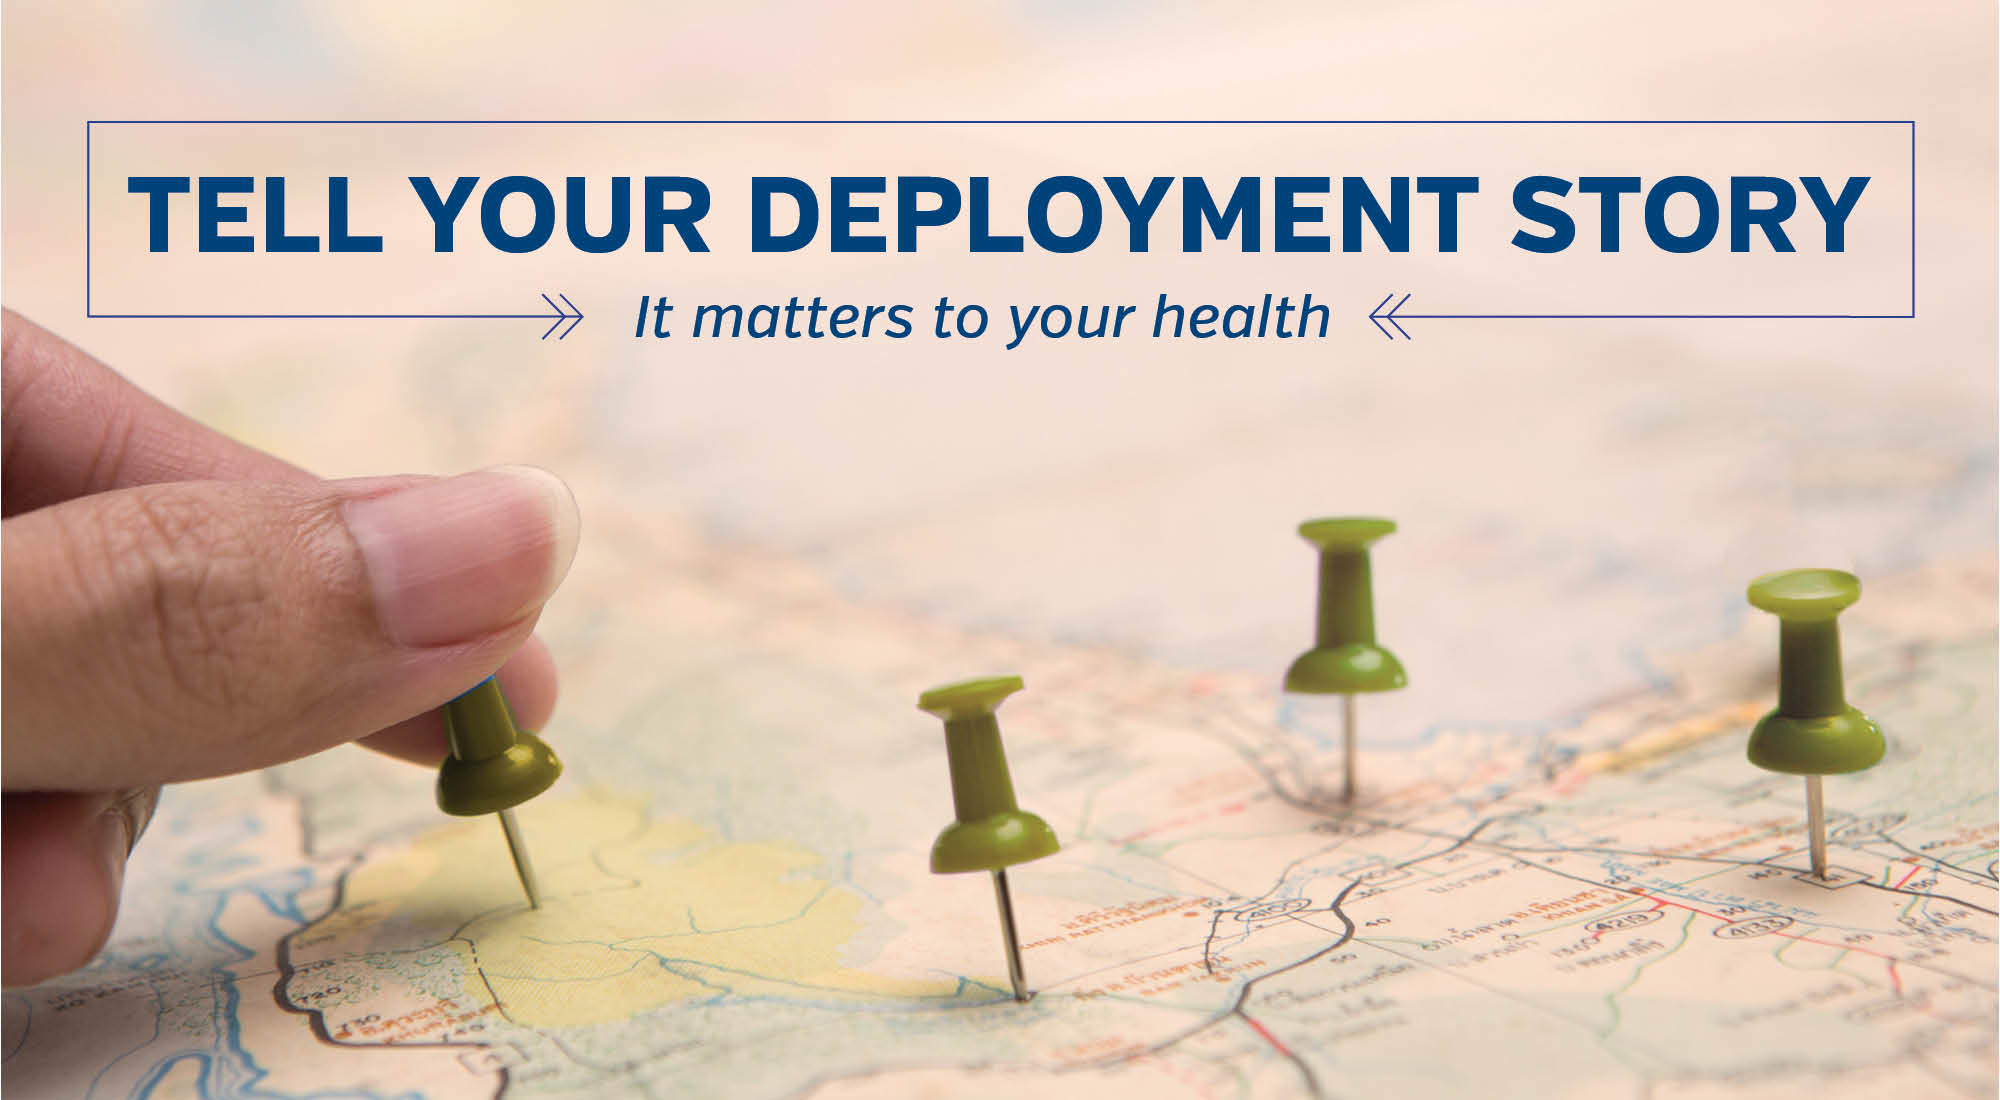 Tell your deployment story. It matters to your health.